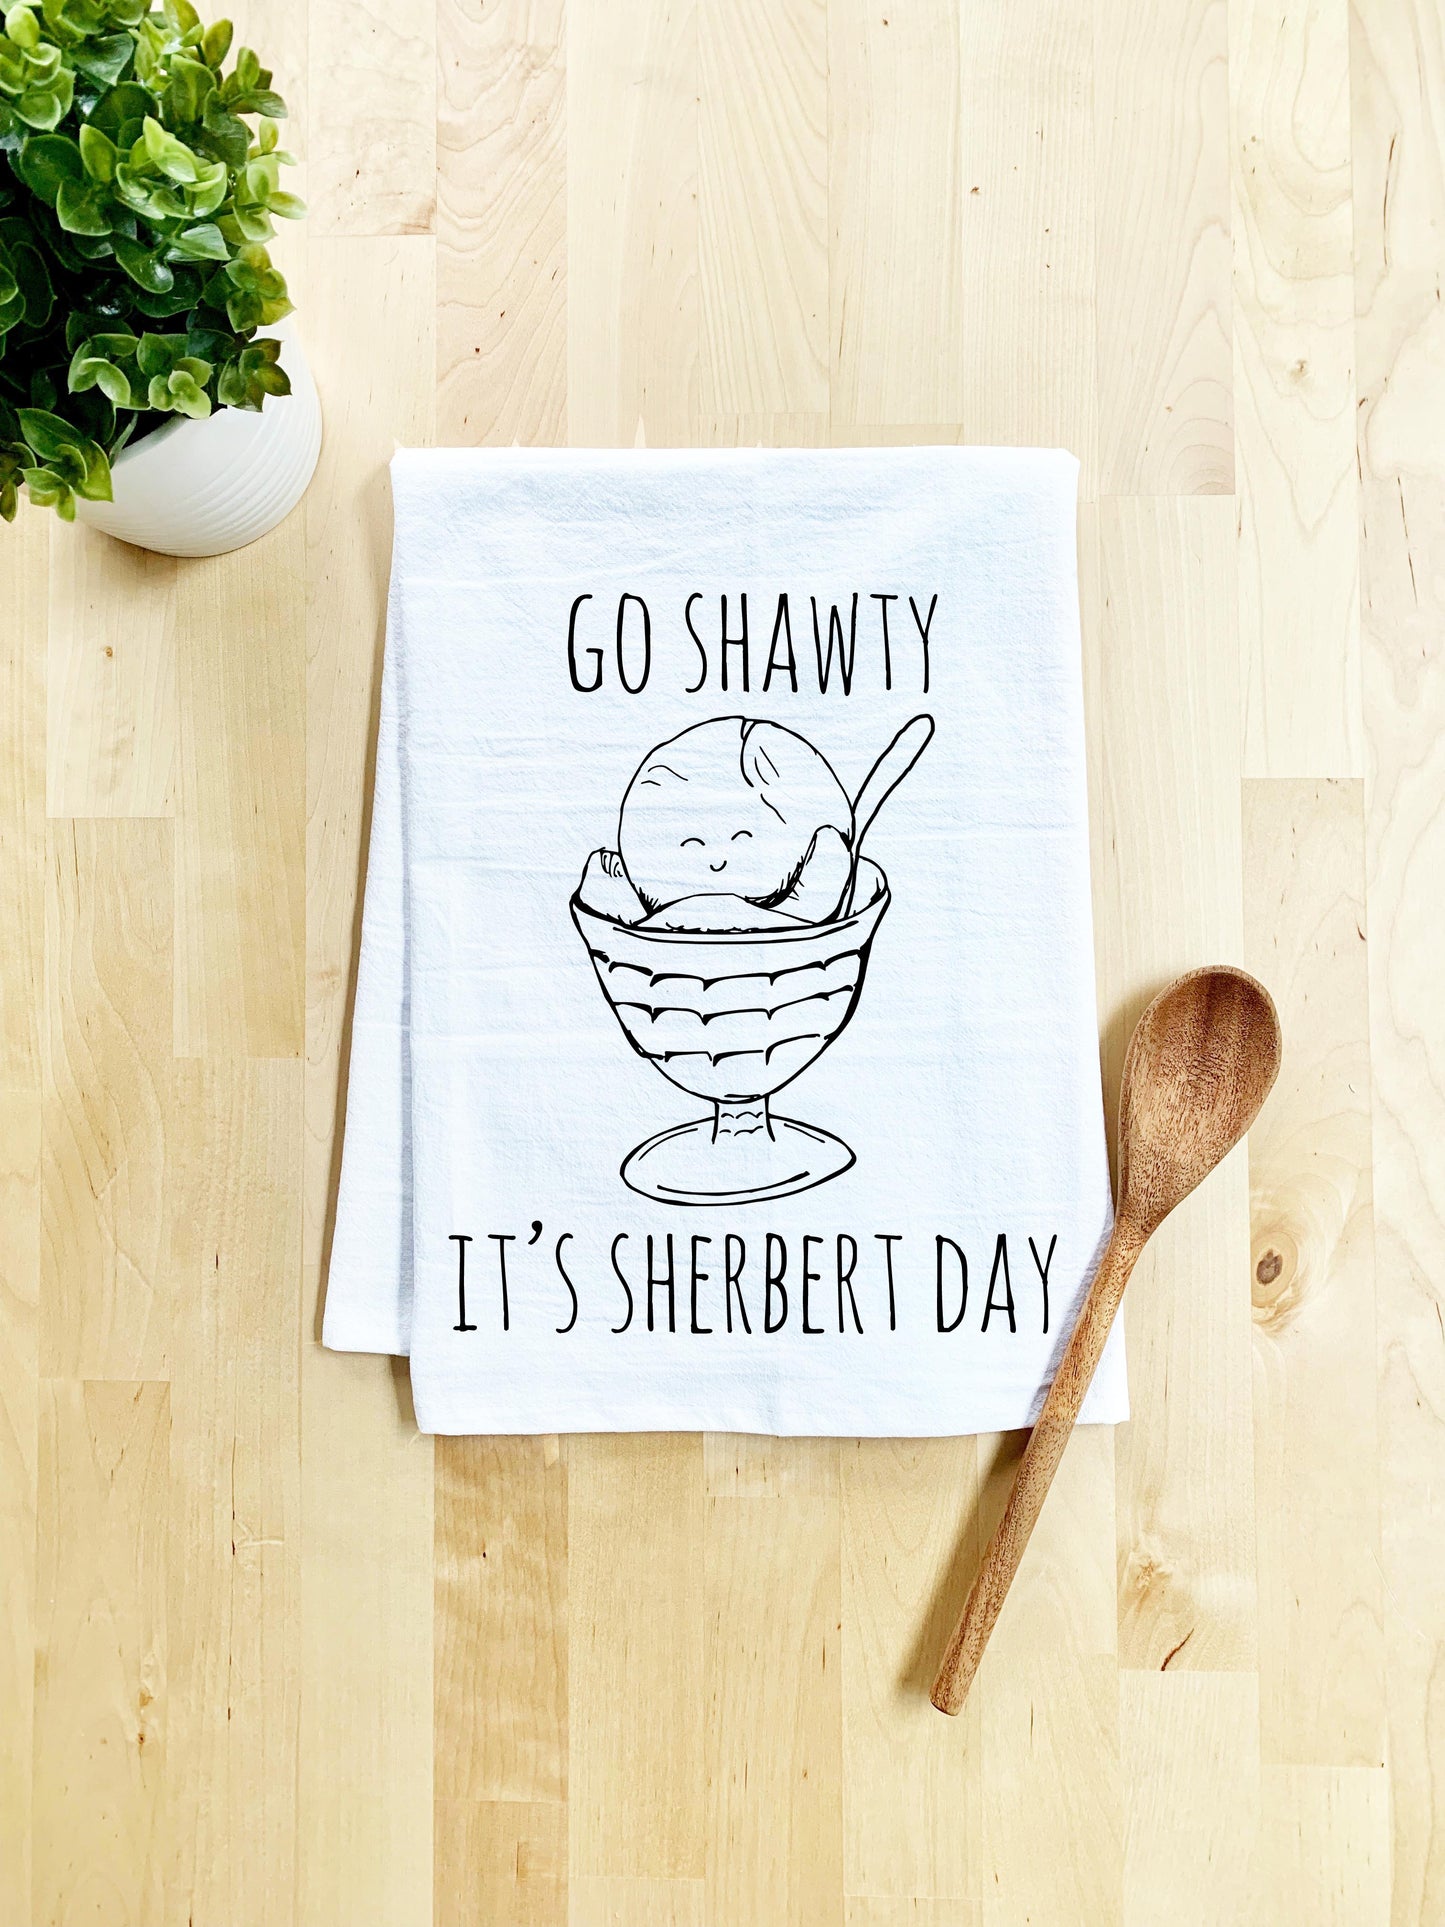 Go Shawty It's Sherbert Day Dish Towel - White Or Gray - MoonlightMakers